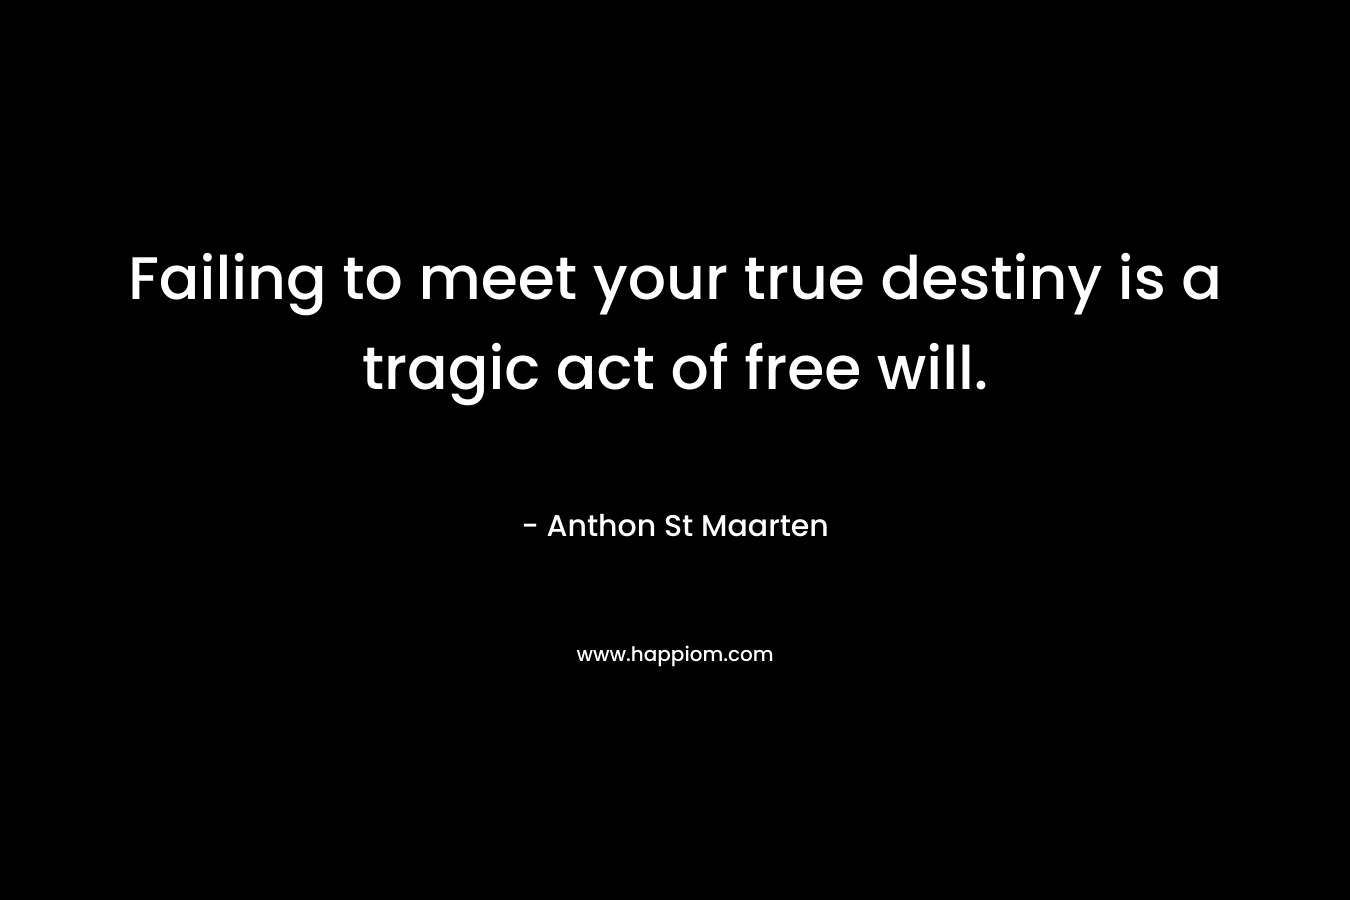 Failing to meet your true destiny is a tragic act of free will.